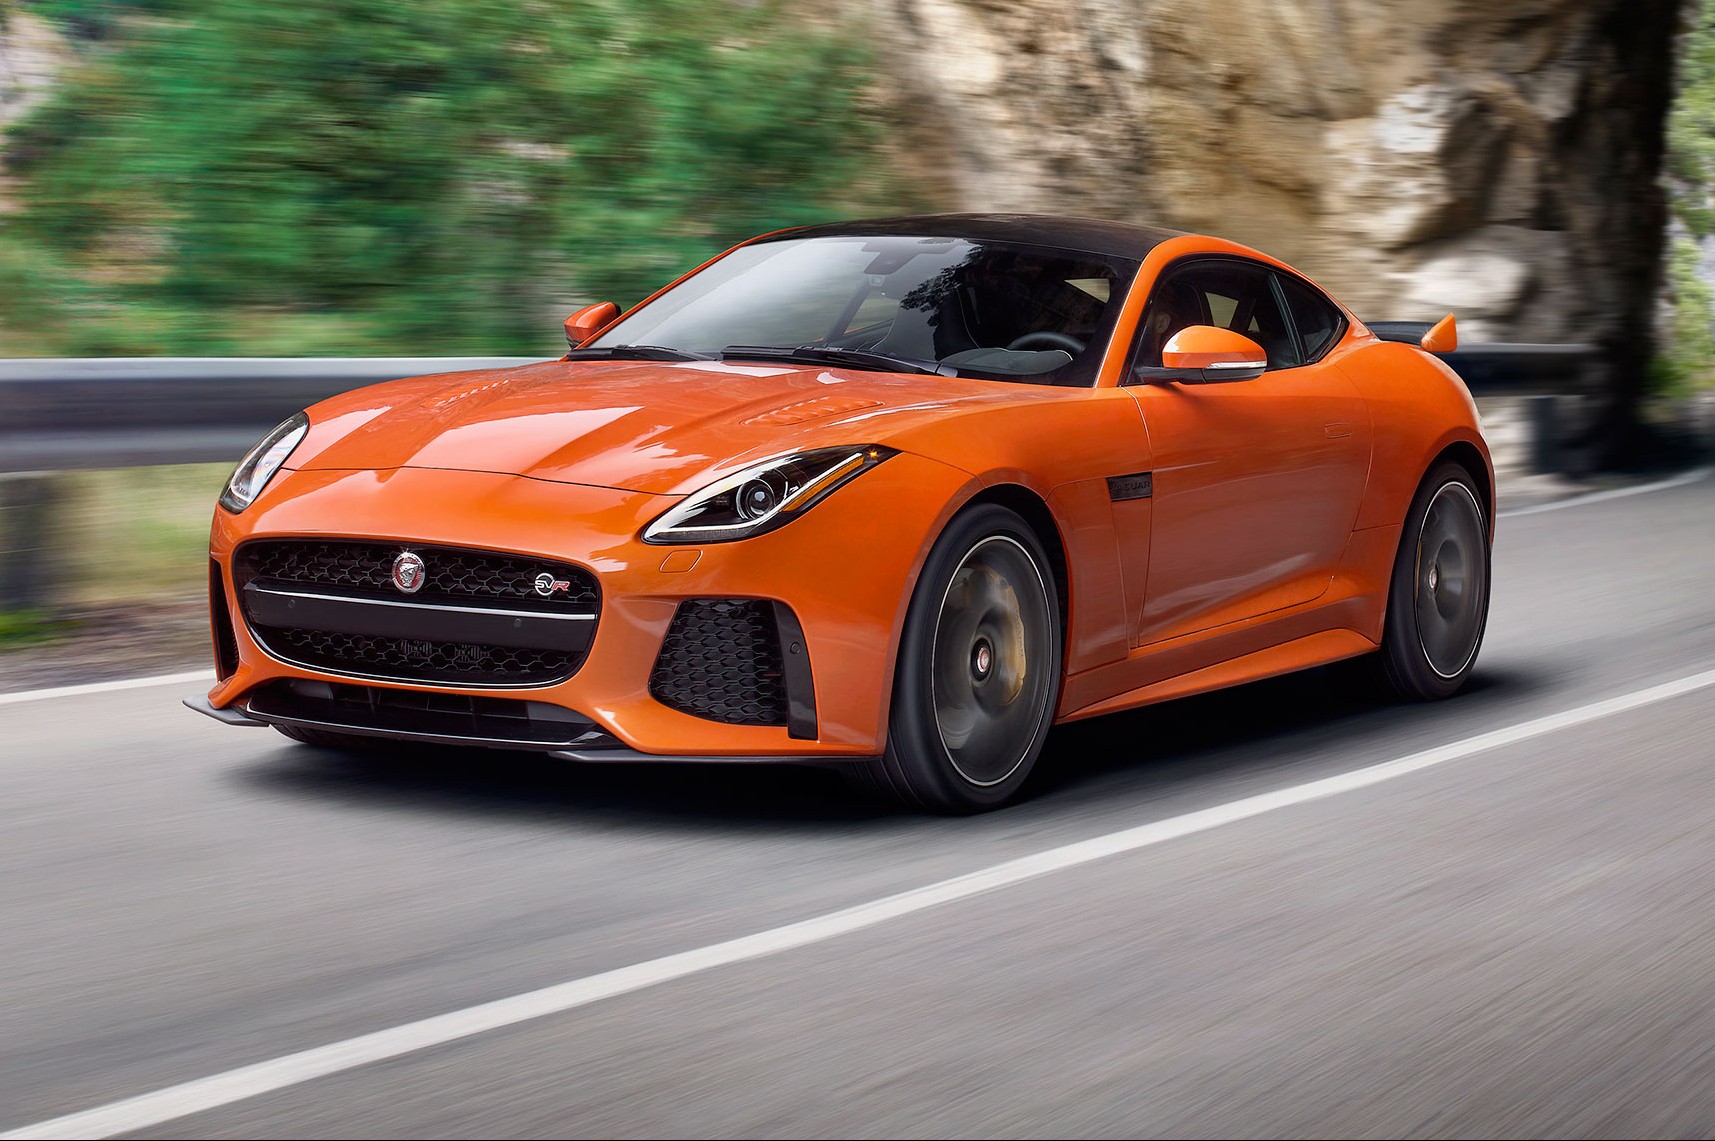 Alta qualidade tuning fil Jaguar F Type 5.0 V8 Supercharged 'Project 7' 575hp